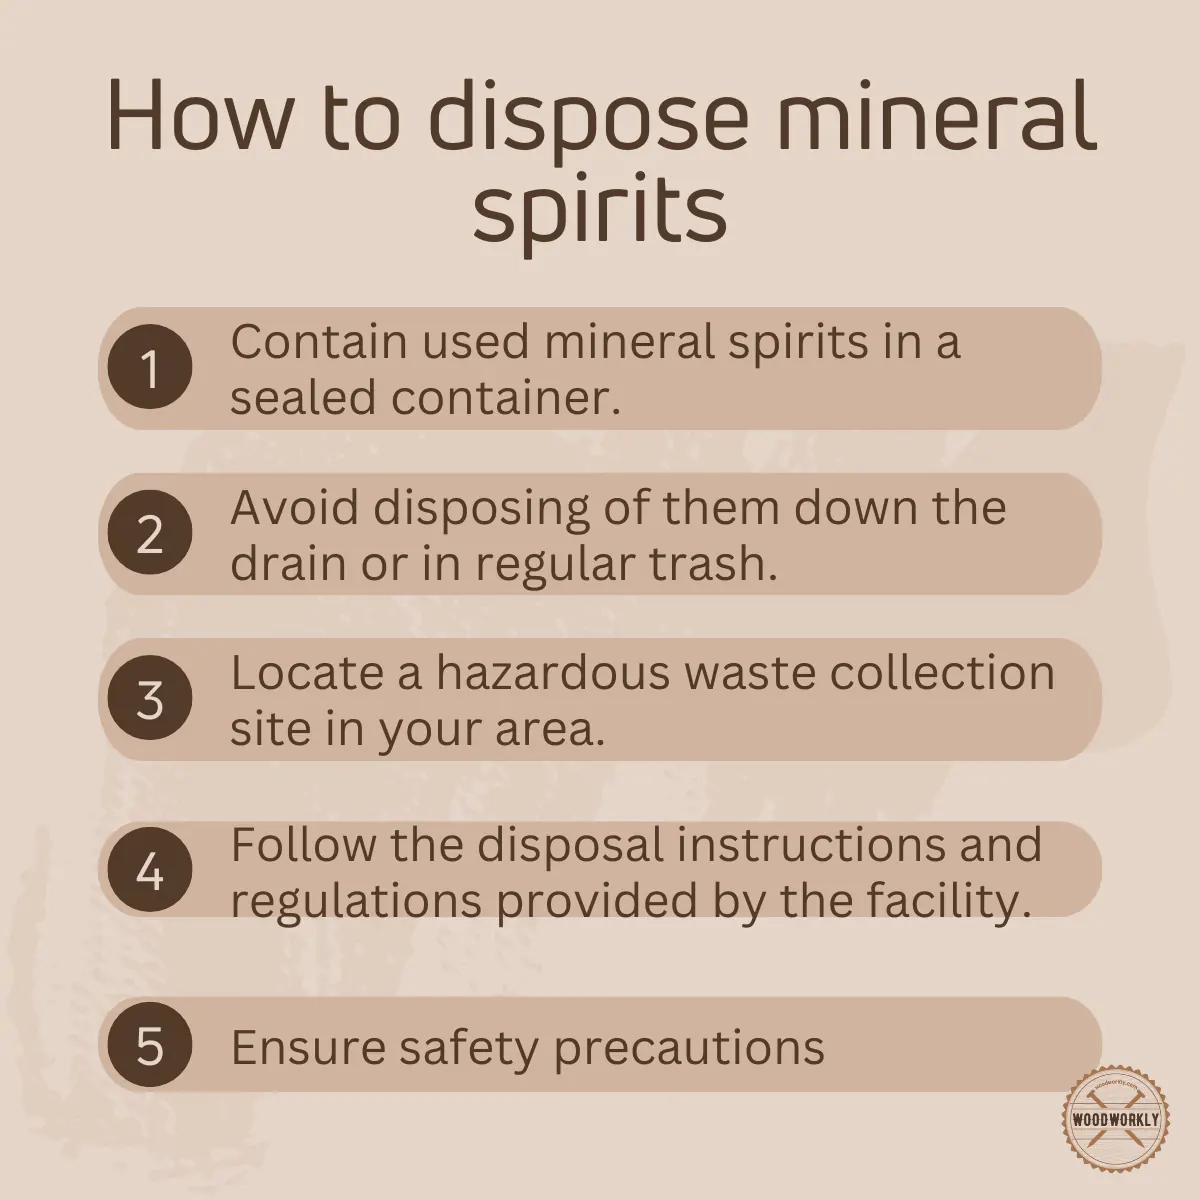 How to dispose mineral spirits